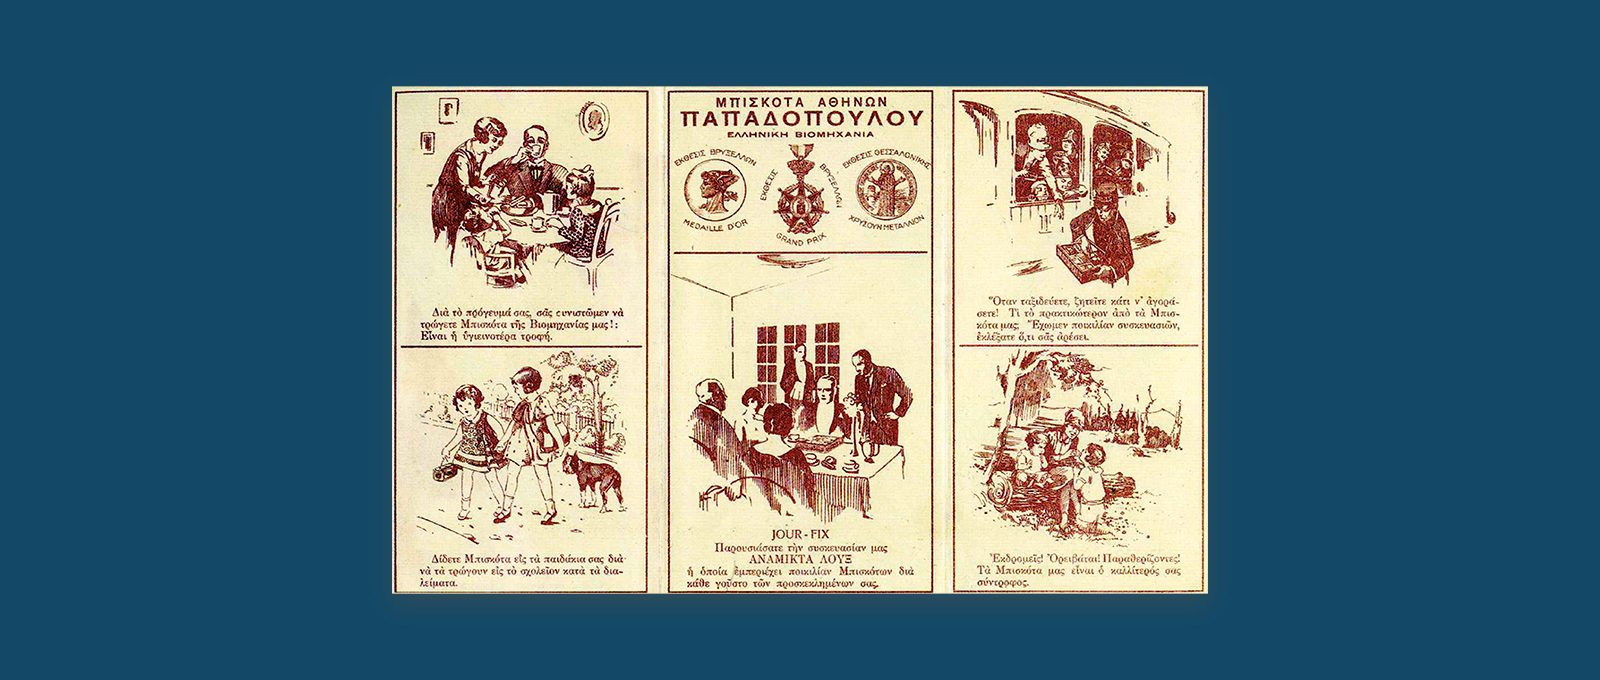 Early 1930s medley of company ads. Biscuits are advertised as a snack for all occasions (as breakfast or school snack, at get-togethers, on train journeys and outings). The awards won by the company at the Brussels International Exposition and Thessaloniki Trade Fair are also pictured.